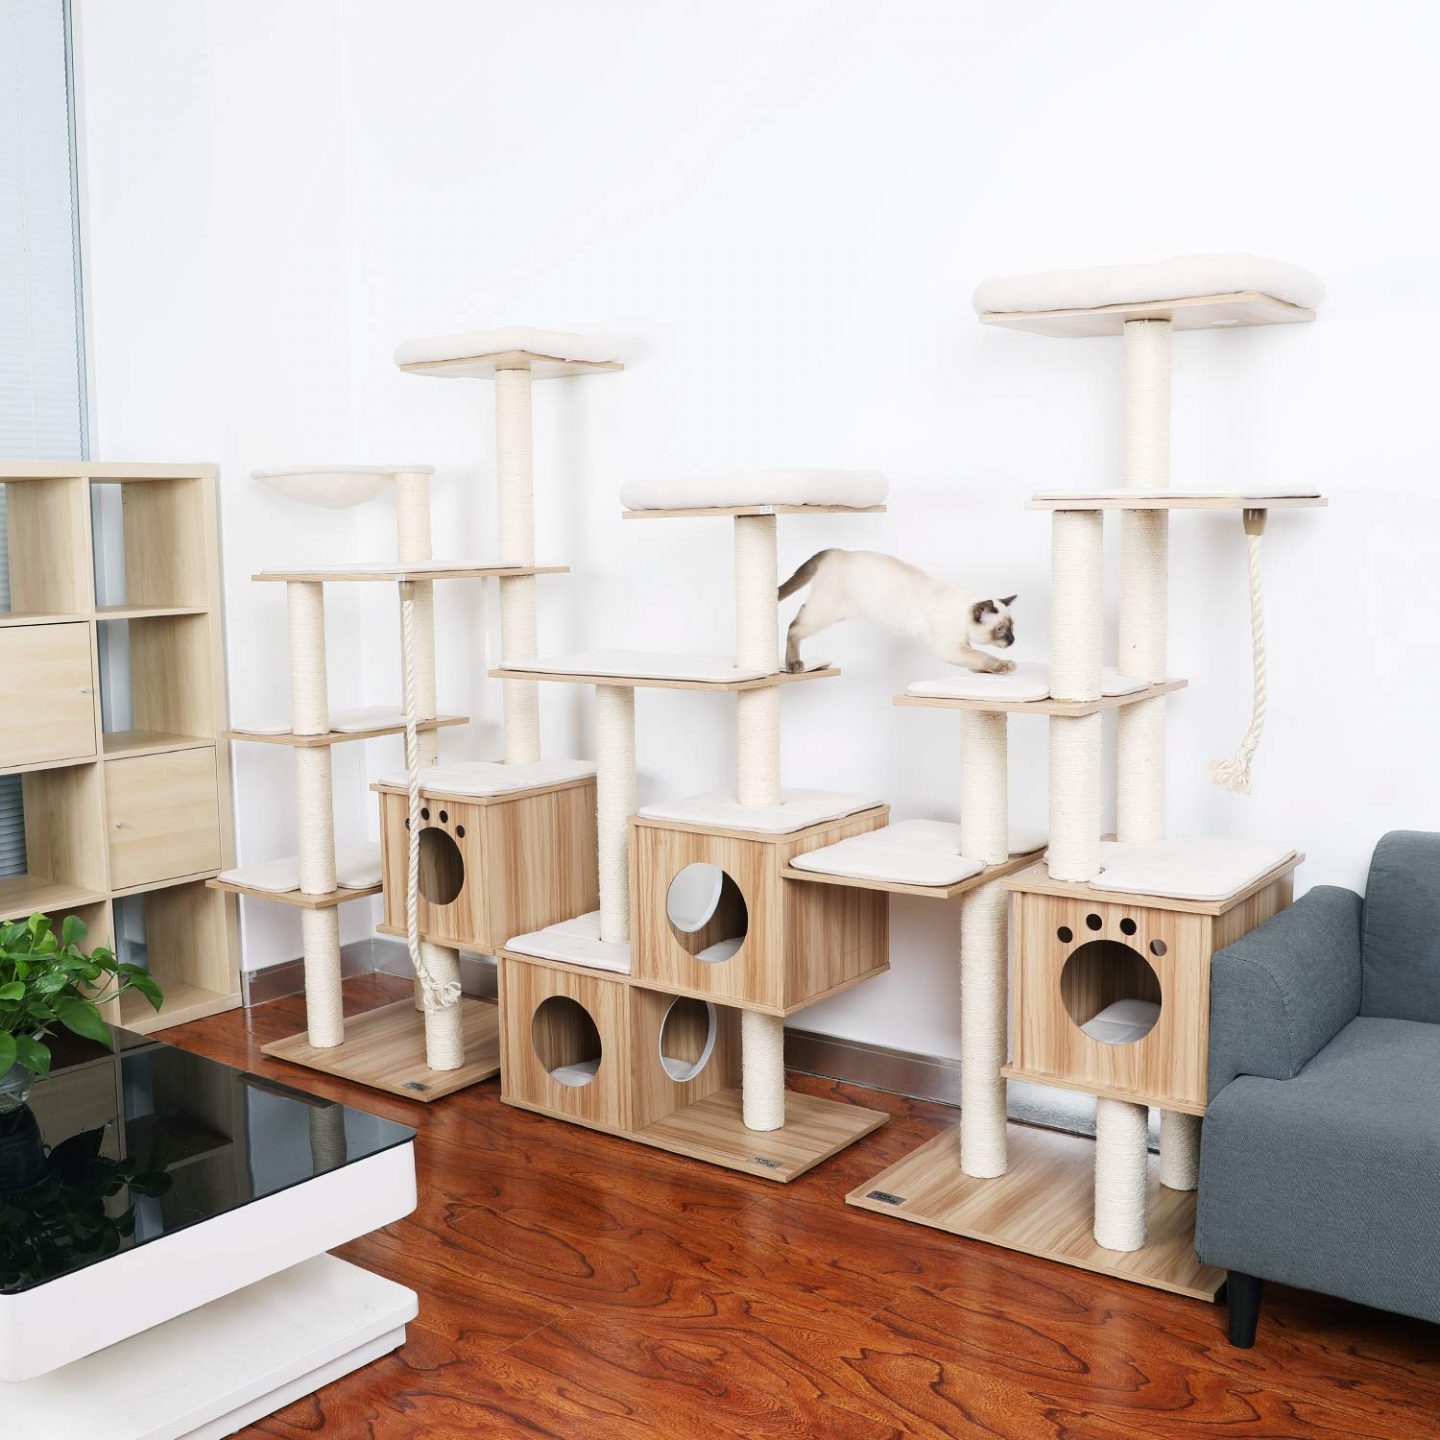 Wood Cat Tree No Carpet - Did you think wooden cat trees NO CARPET were just a dream? Think Again. These affordable models don't collect pet hair, are easy to clean and combine to make a cat playground. AWESOME